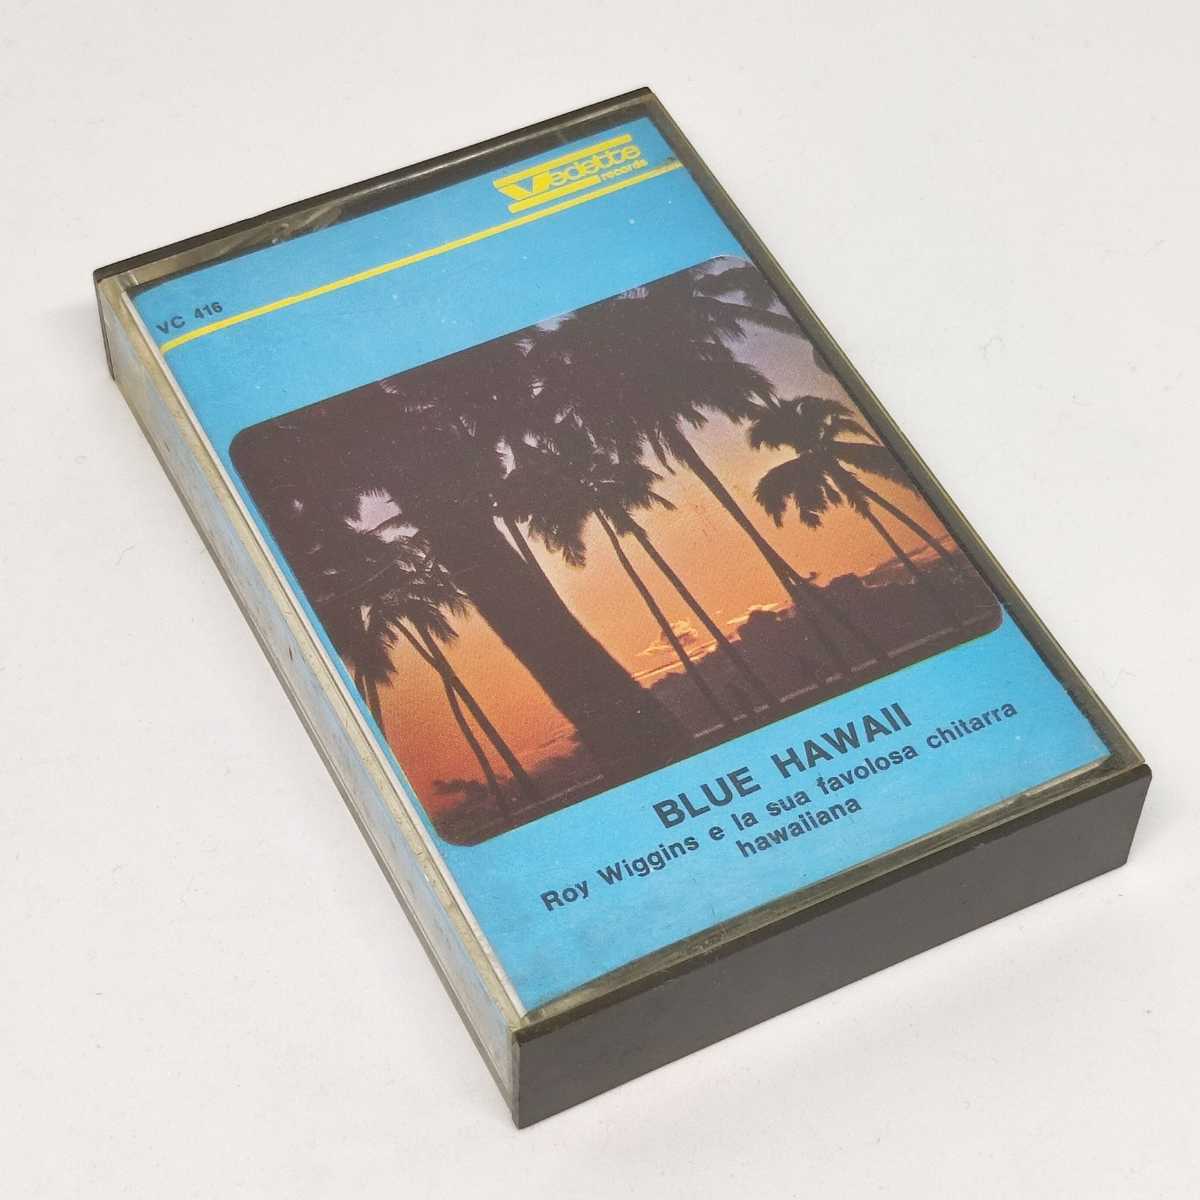 roi*wi Gin zLittle Roy Wiggins cassette tape BLUE HAWAII blue Hawaii Italy record Vedette exotic steel guitar 